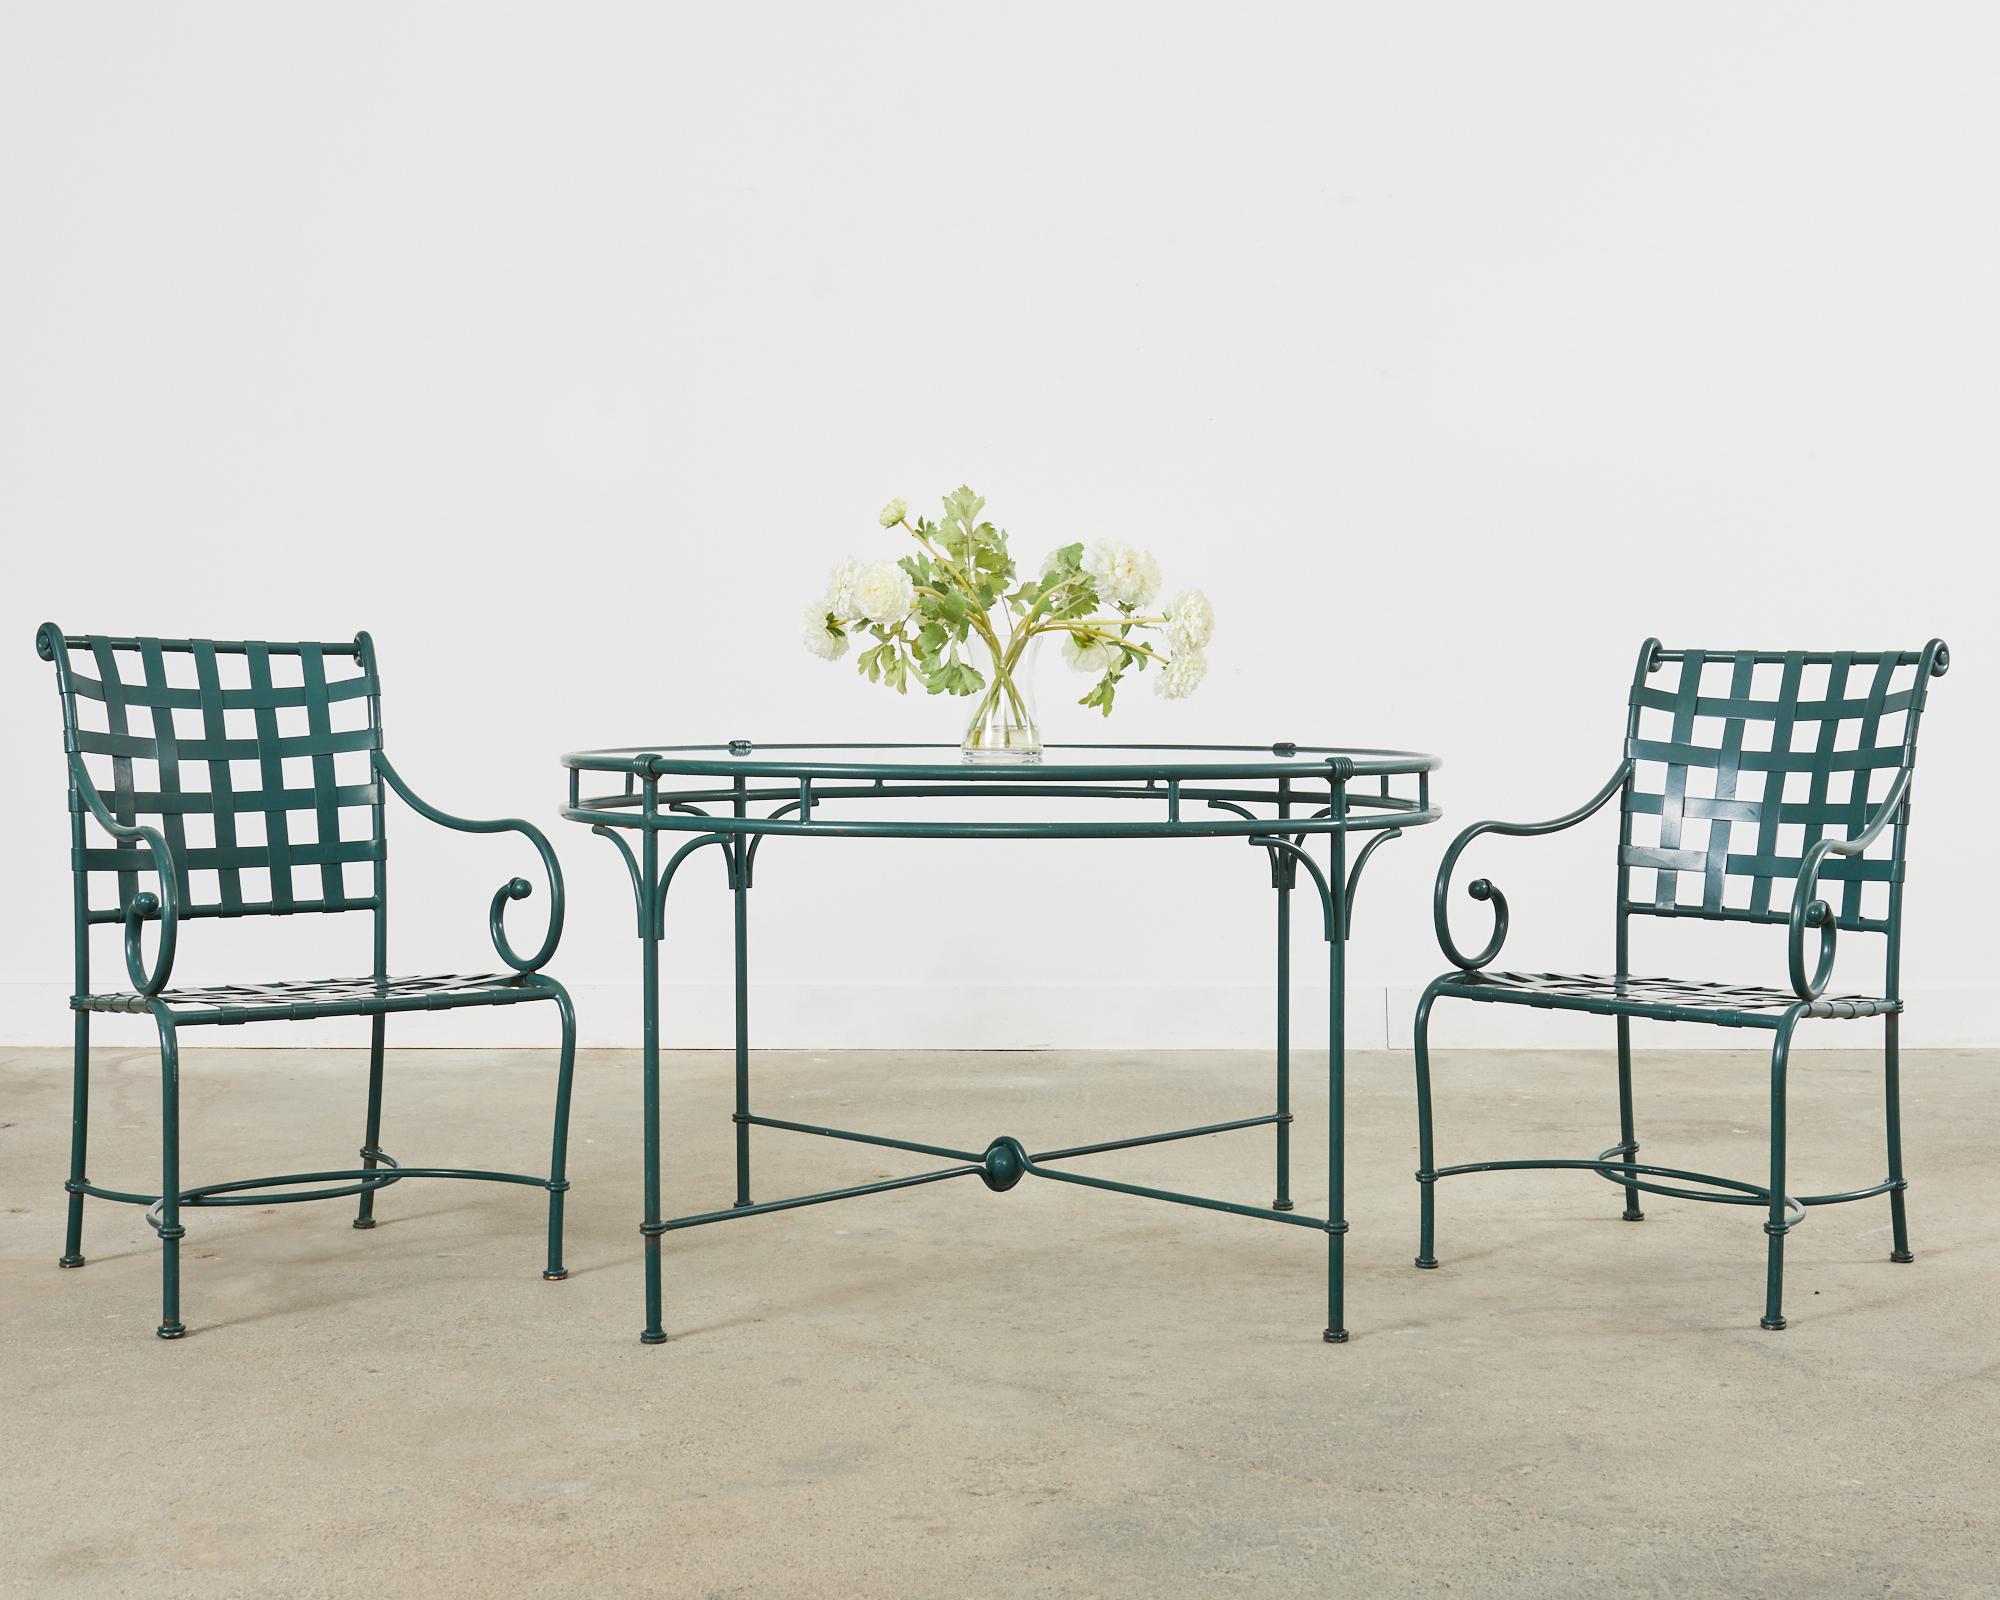 Rare set of six Florentine collection wrought aluminum patio and garden dining armchairs designed by Richard Frinier for Brown Jordan. The set features generous powder coated aluminum frames in a stately pompeian green finish. The backs have a